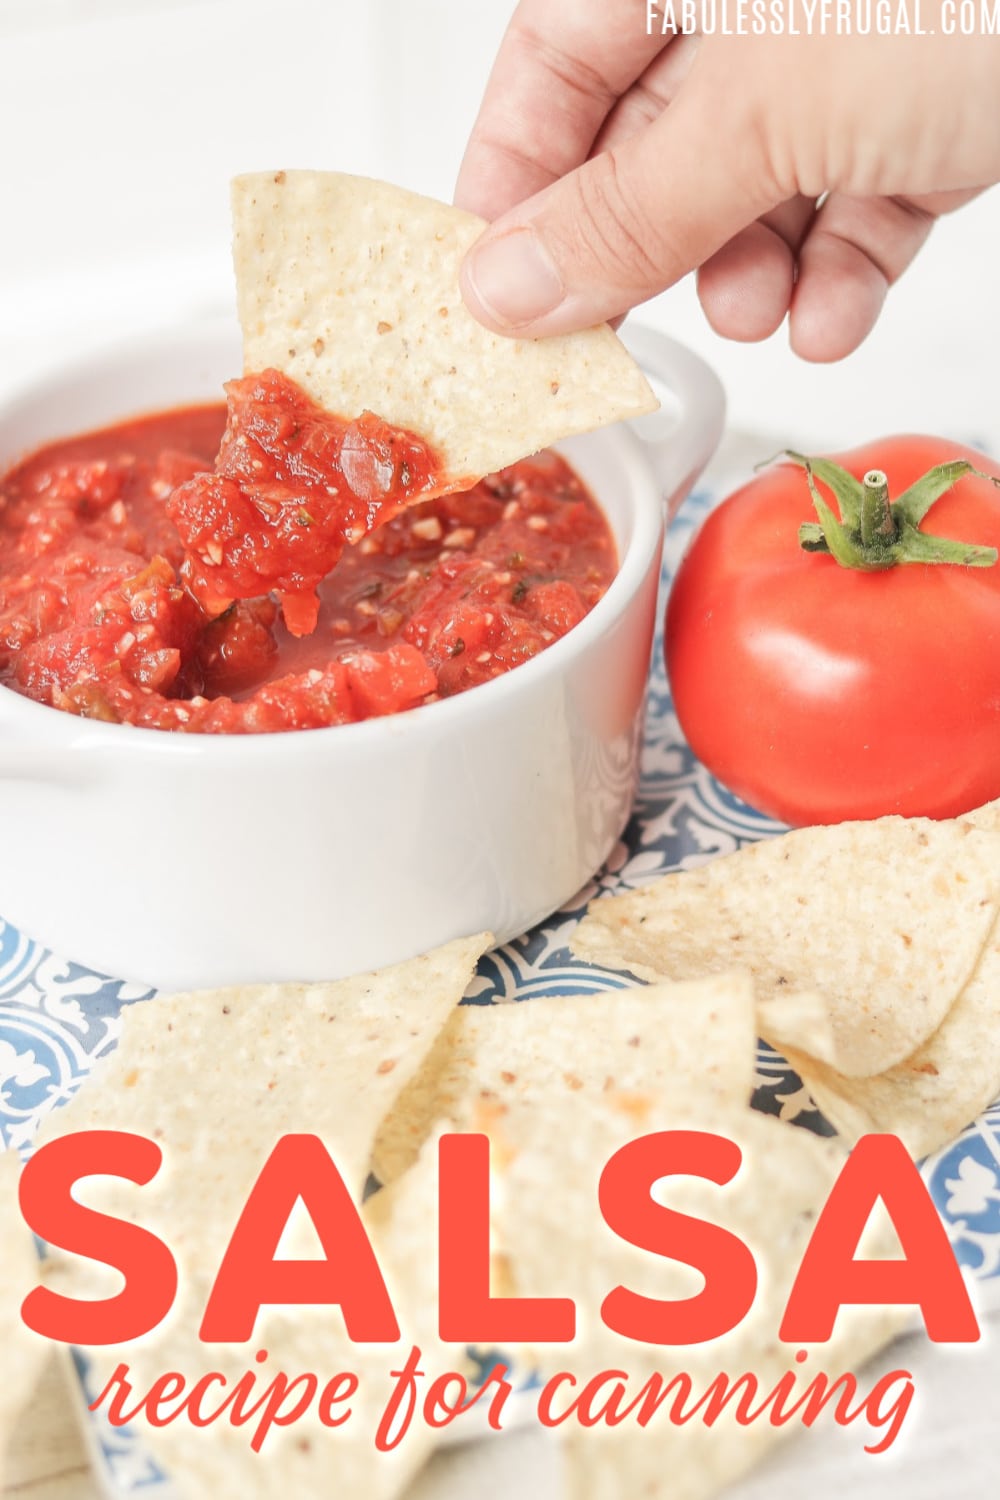 Salsa recipe for canning